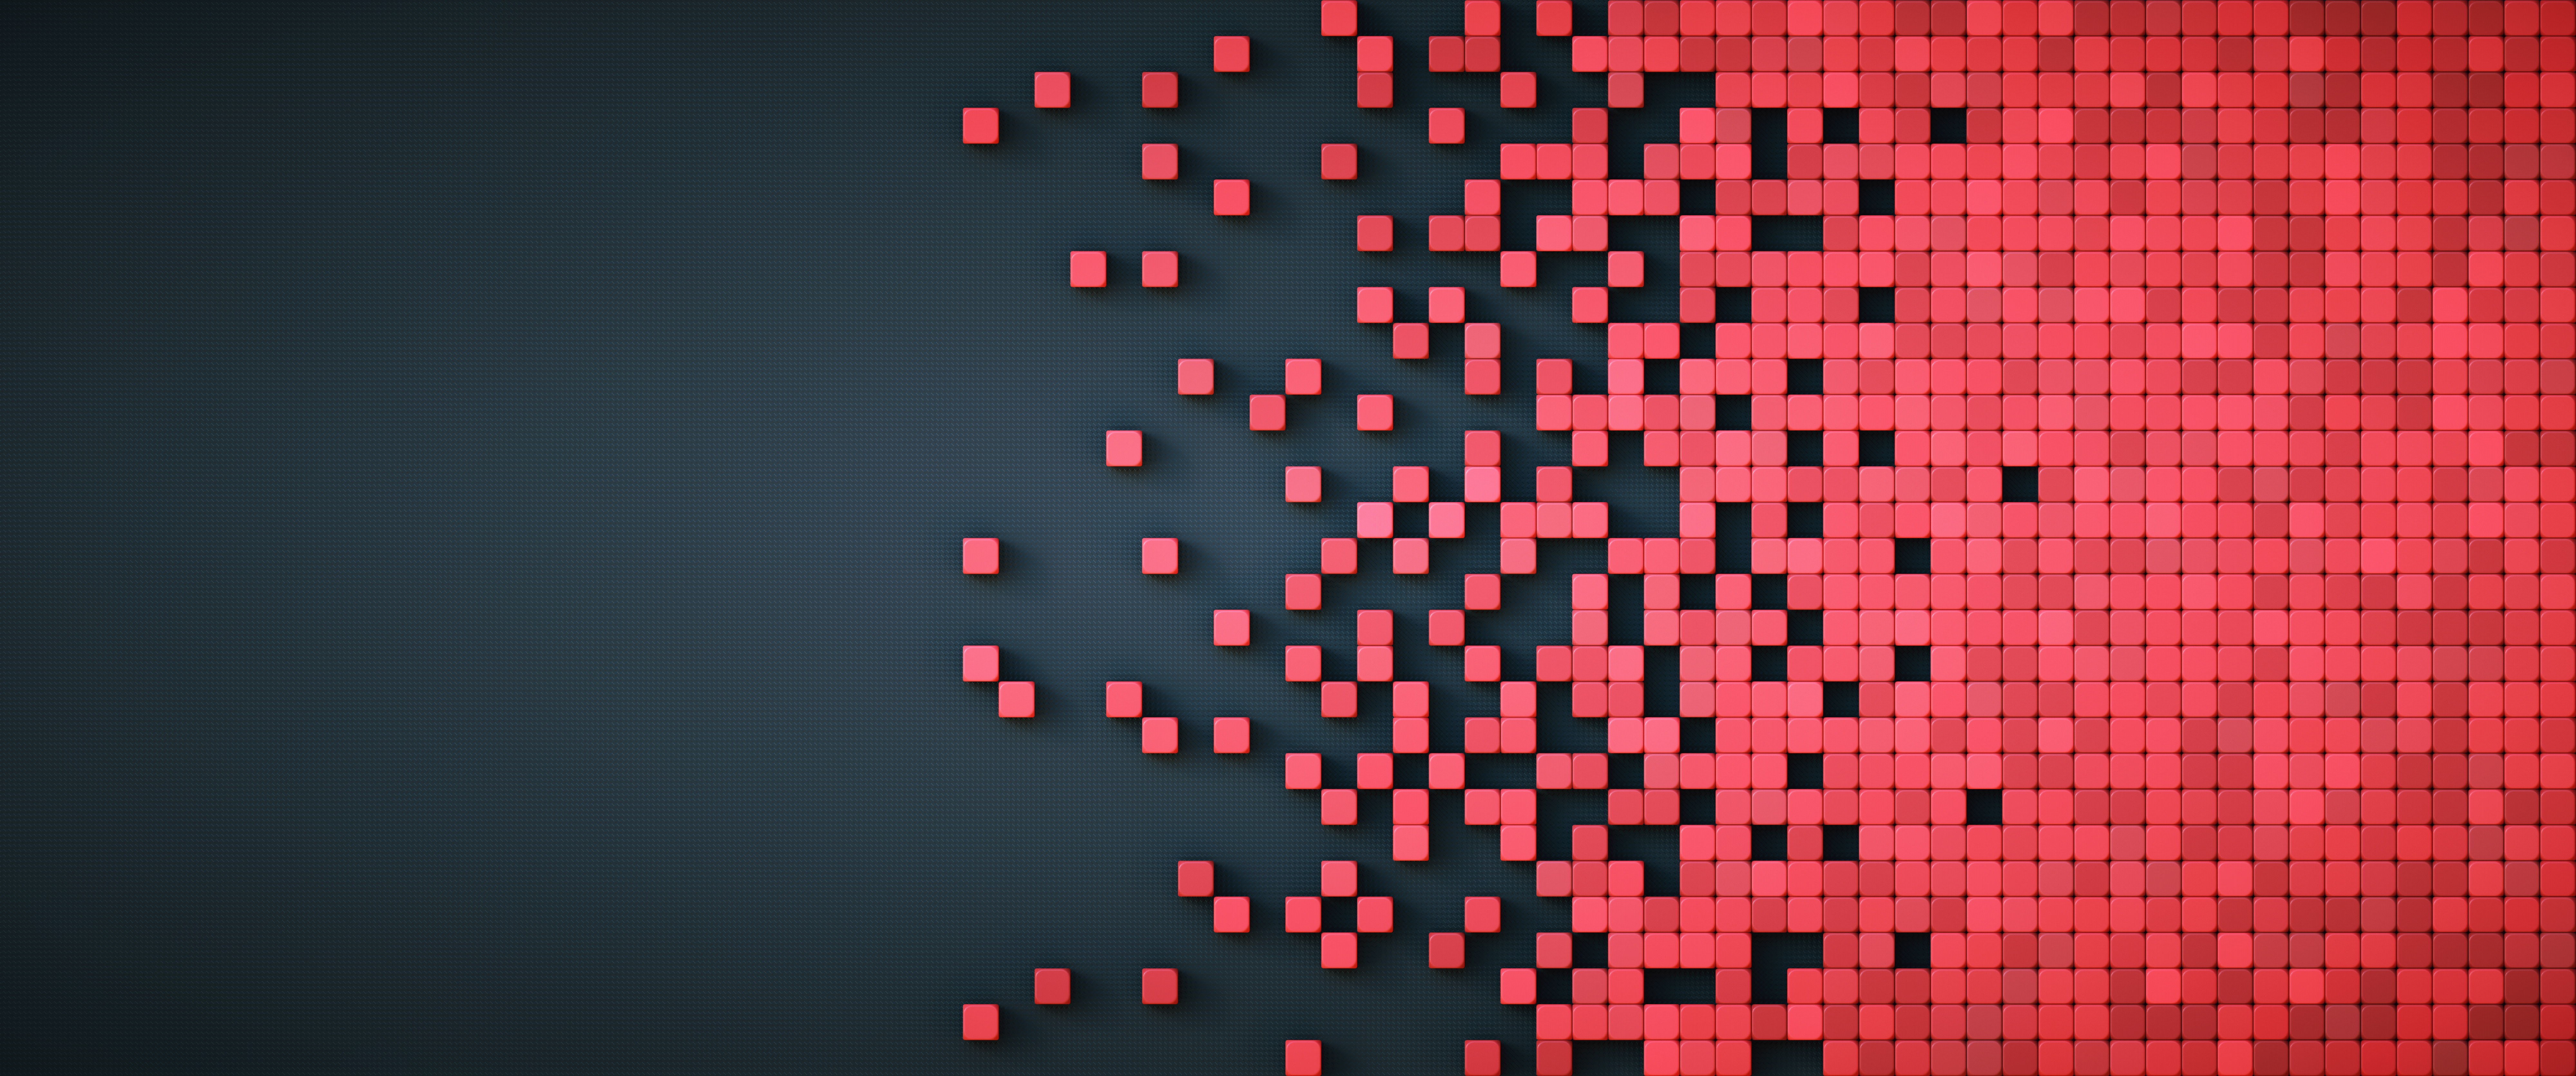 Pixelated data representation with red physical cube shapes on a black artificial background, tile-able composition